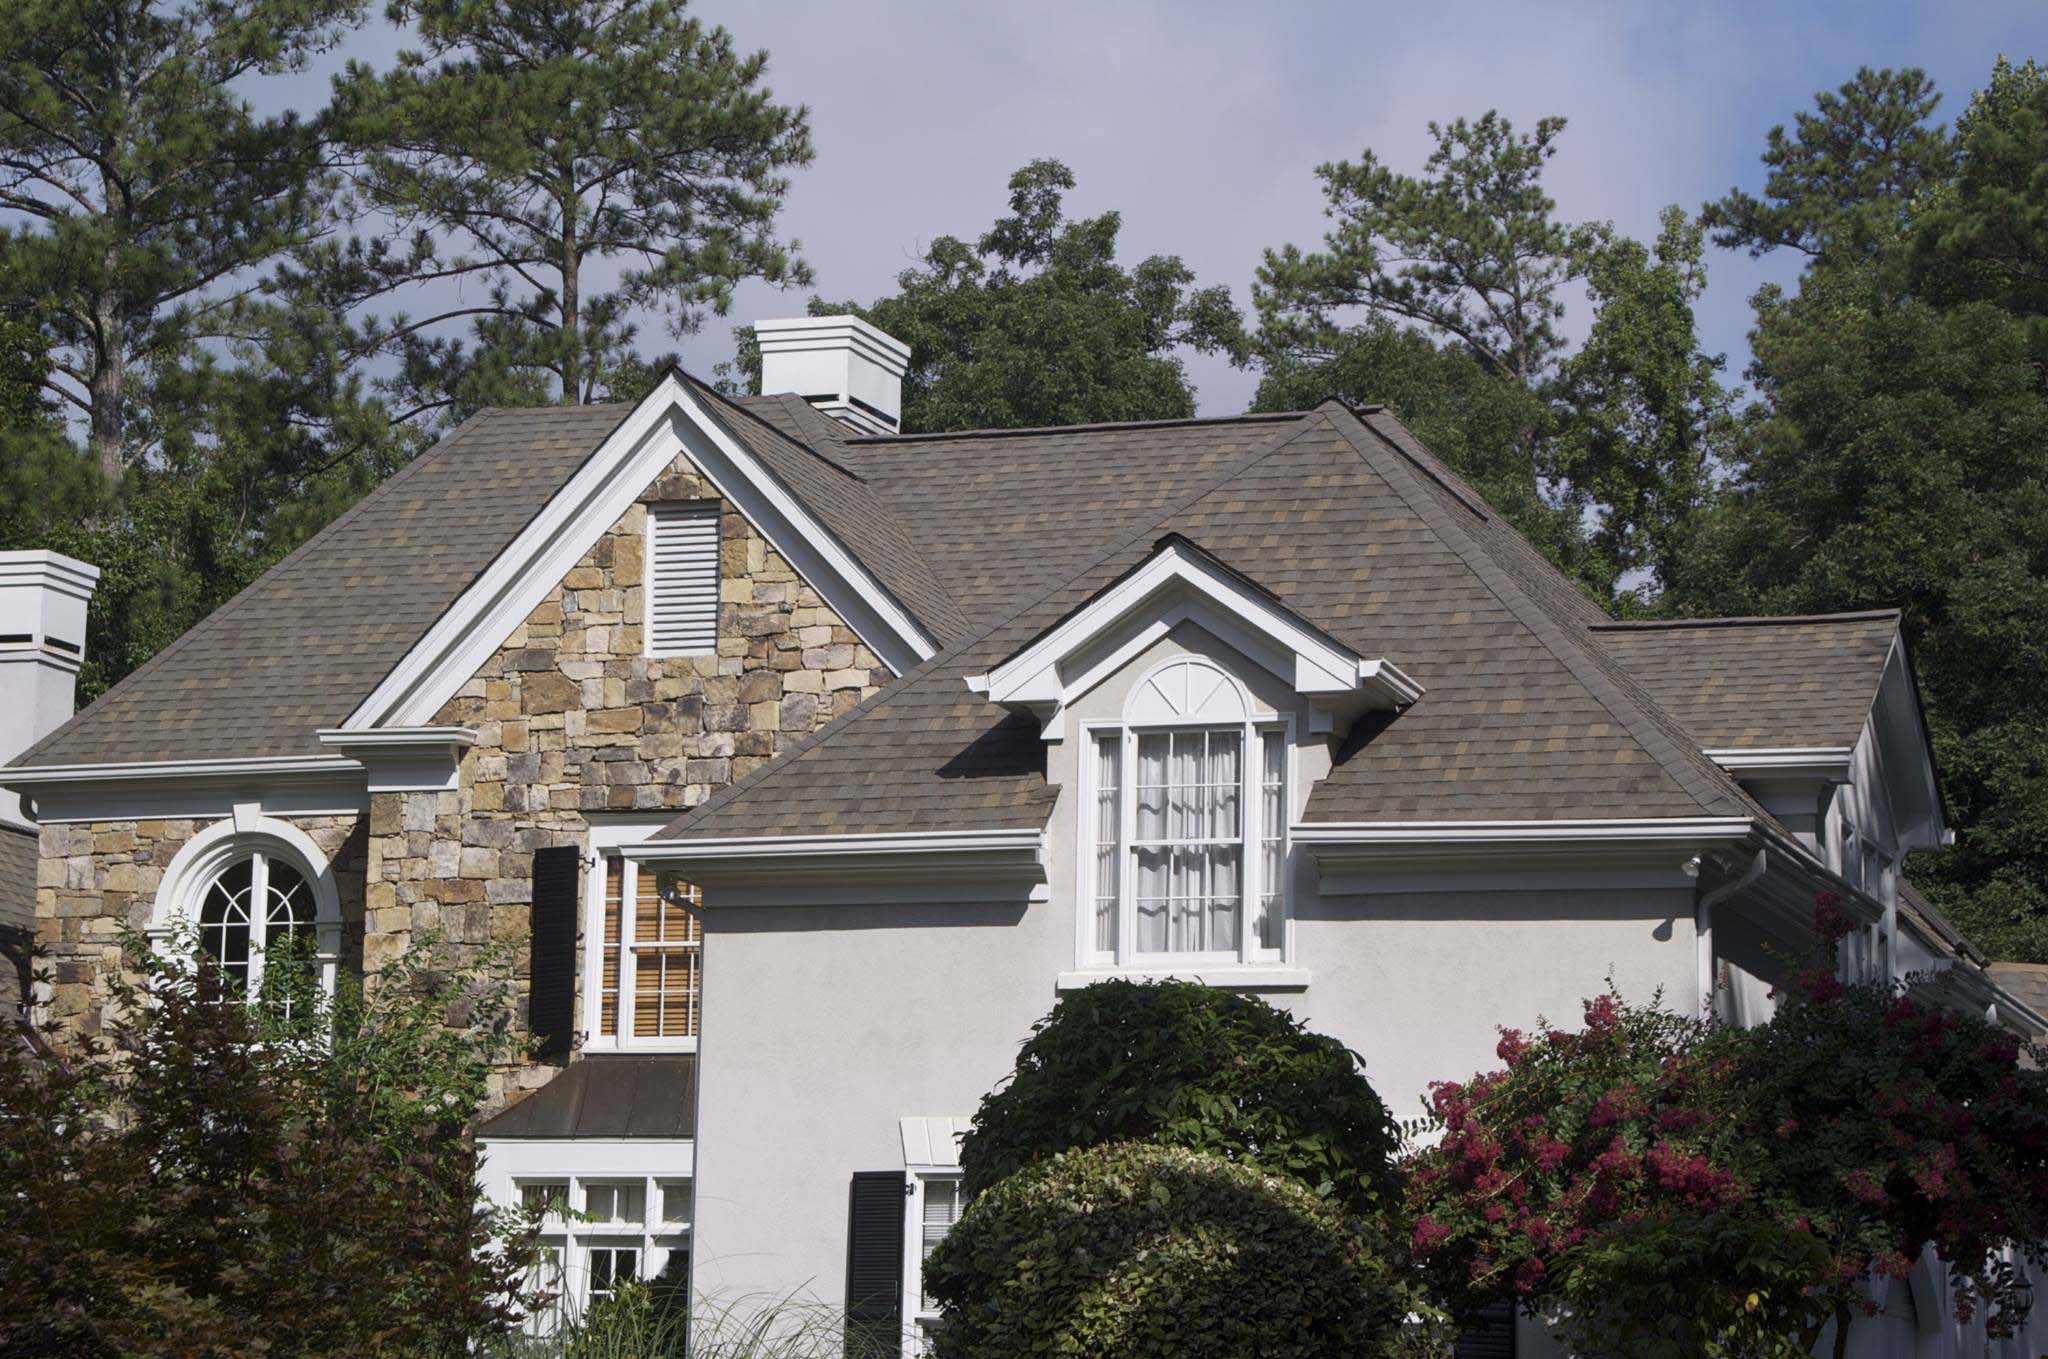 WIW Roofing Offers Trusted Roofing Solutions for Local Residents